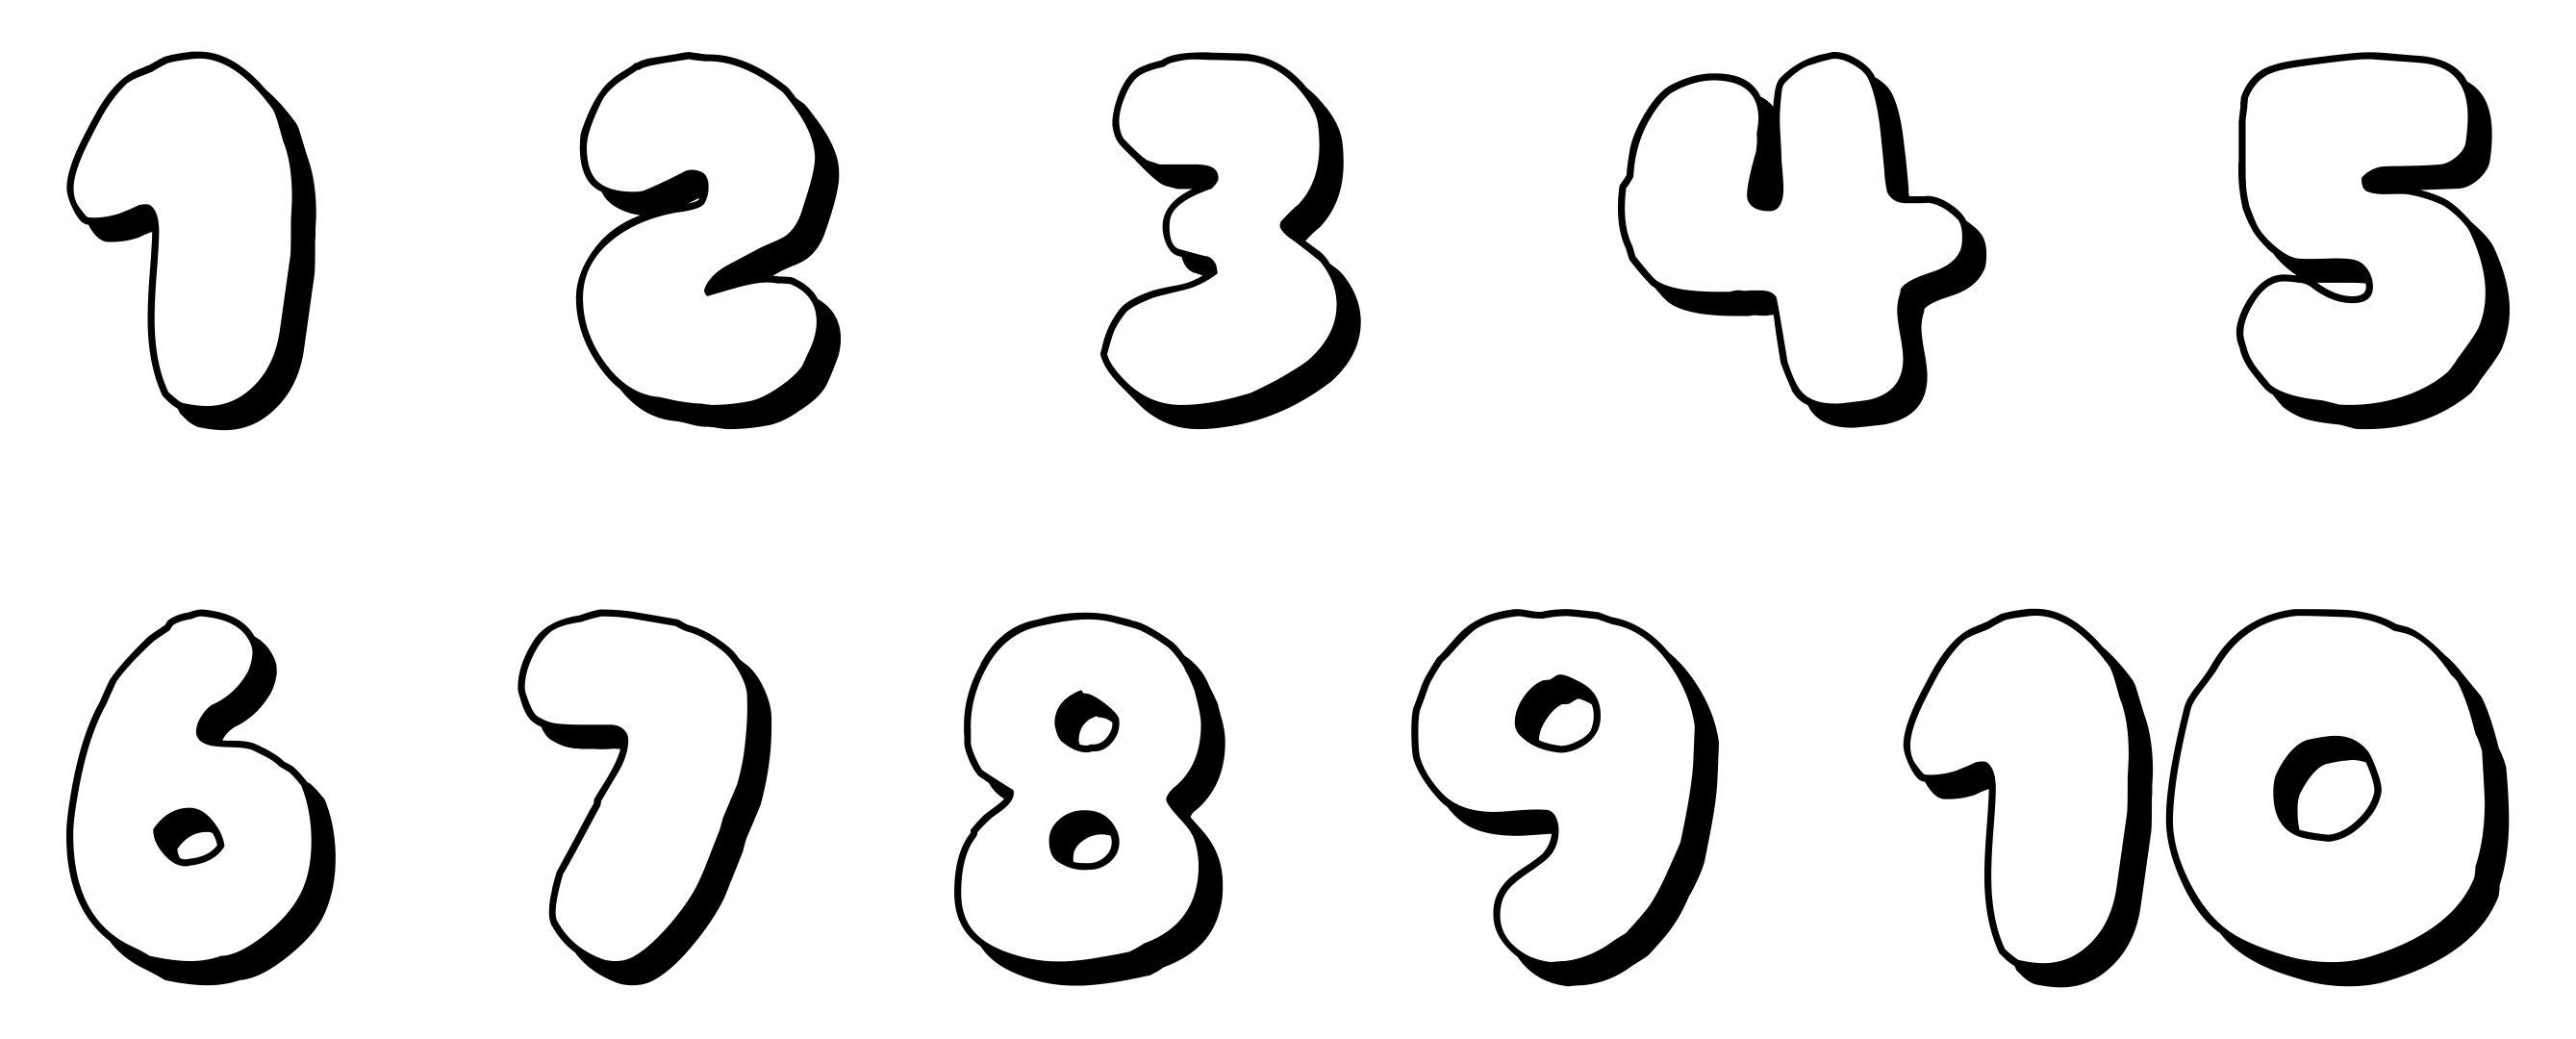 Printable Bubble Numbers 224759 